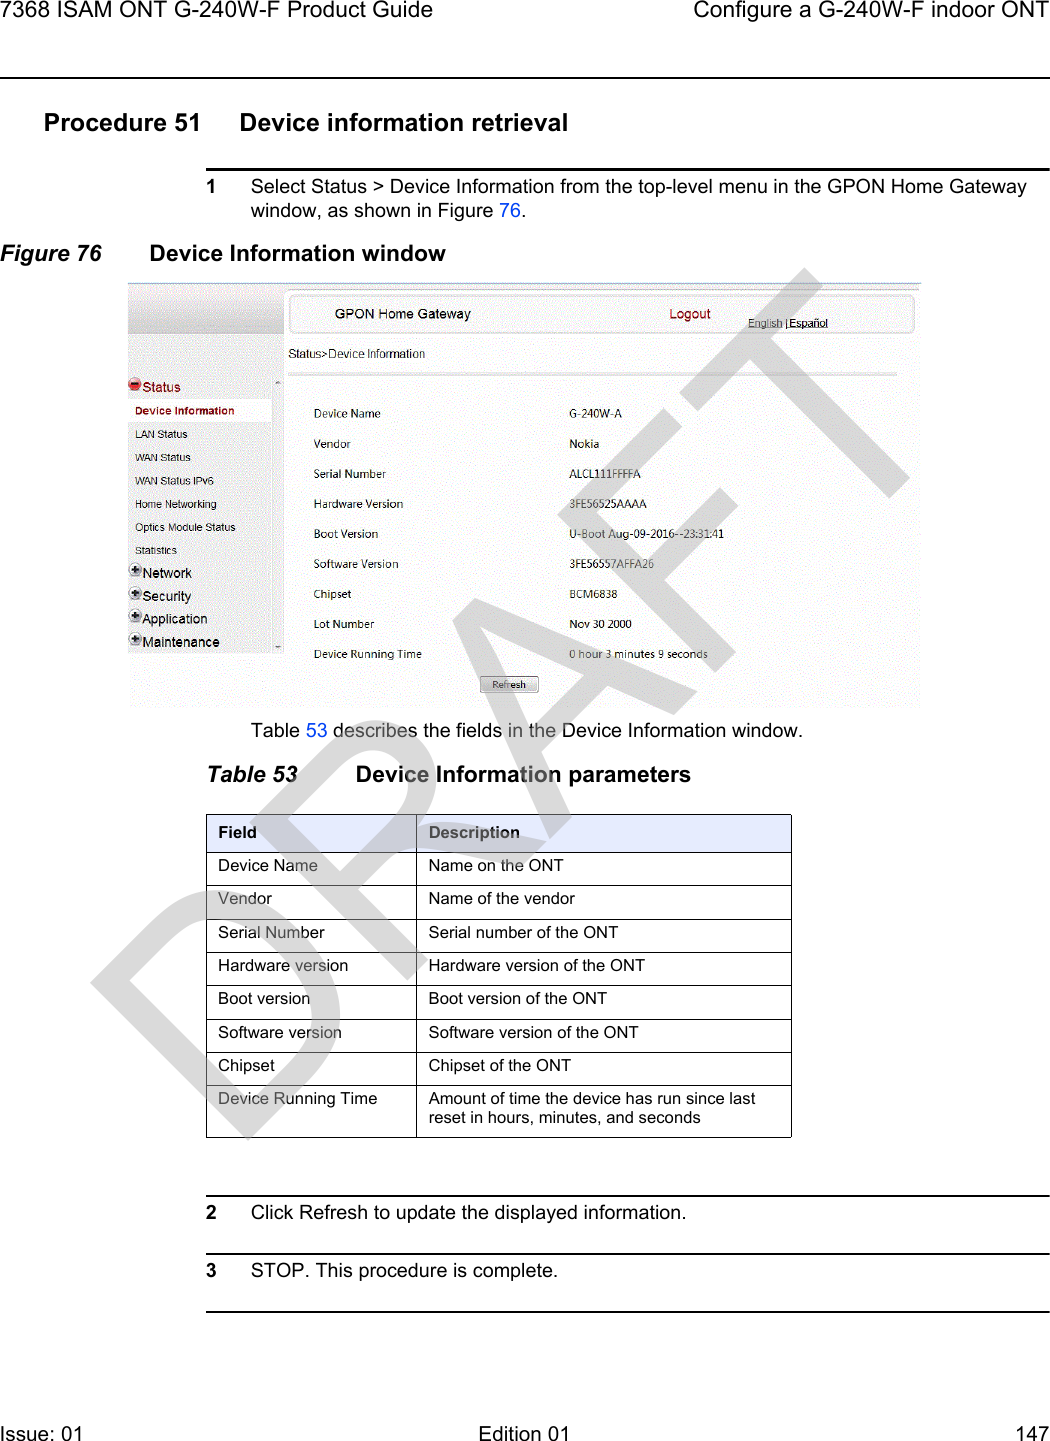 7368 ISAM ONT G-240W-F Product Guide Configure a G-240W-F indoor ONTIssue: 01 Edition 01 147 Procedure 51 Device information retrieval1Select Status &gt; Device Information from the top-level menu in the GPON Home Gateway window, as shown in Figure 76.Figure 76 Device Information windowTable 53 describes the fields in the Device Information window.Table 53 Device Information parameters2Click Refresh to update the displayed information. 3STOP. This procedure is complete.Field DescriptionDevice Name Name on the ONTVendor Name of the vendorSerial Number Serial number of the ONTHardware version Hardware version of the ONTBoot version Boot version of the ONTSoftware version Software version of the ONTChipset Chipset of the ONTDevice Running Time Amount of time the device has run since last reset in hours, minutes, and secondsDRAFT